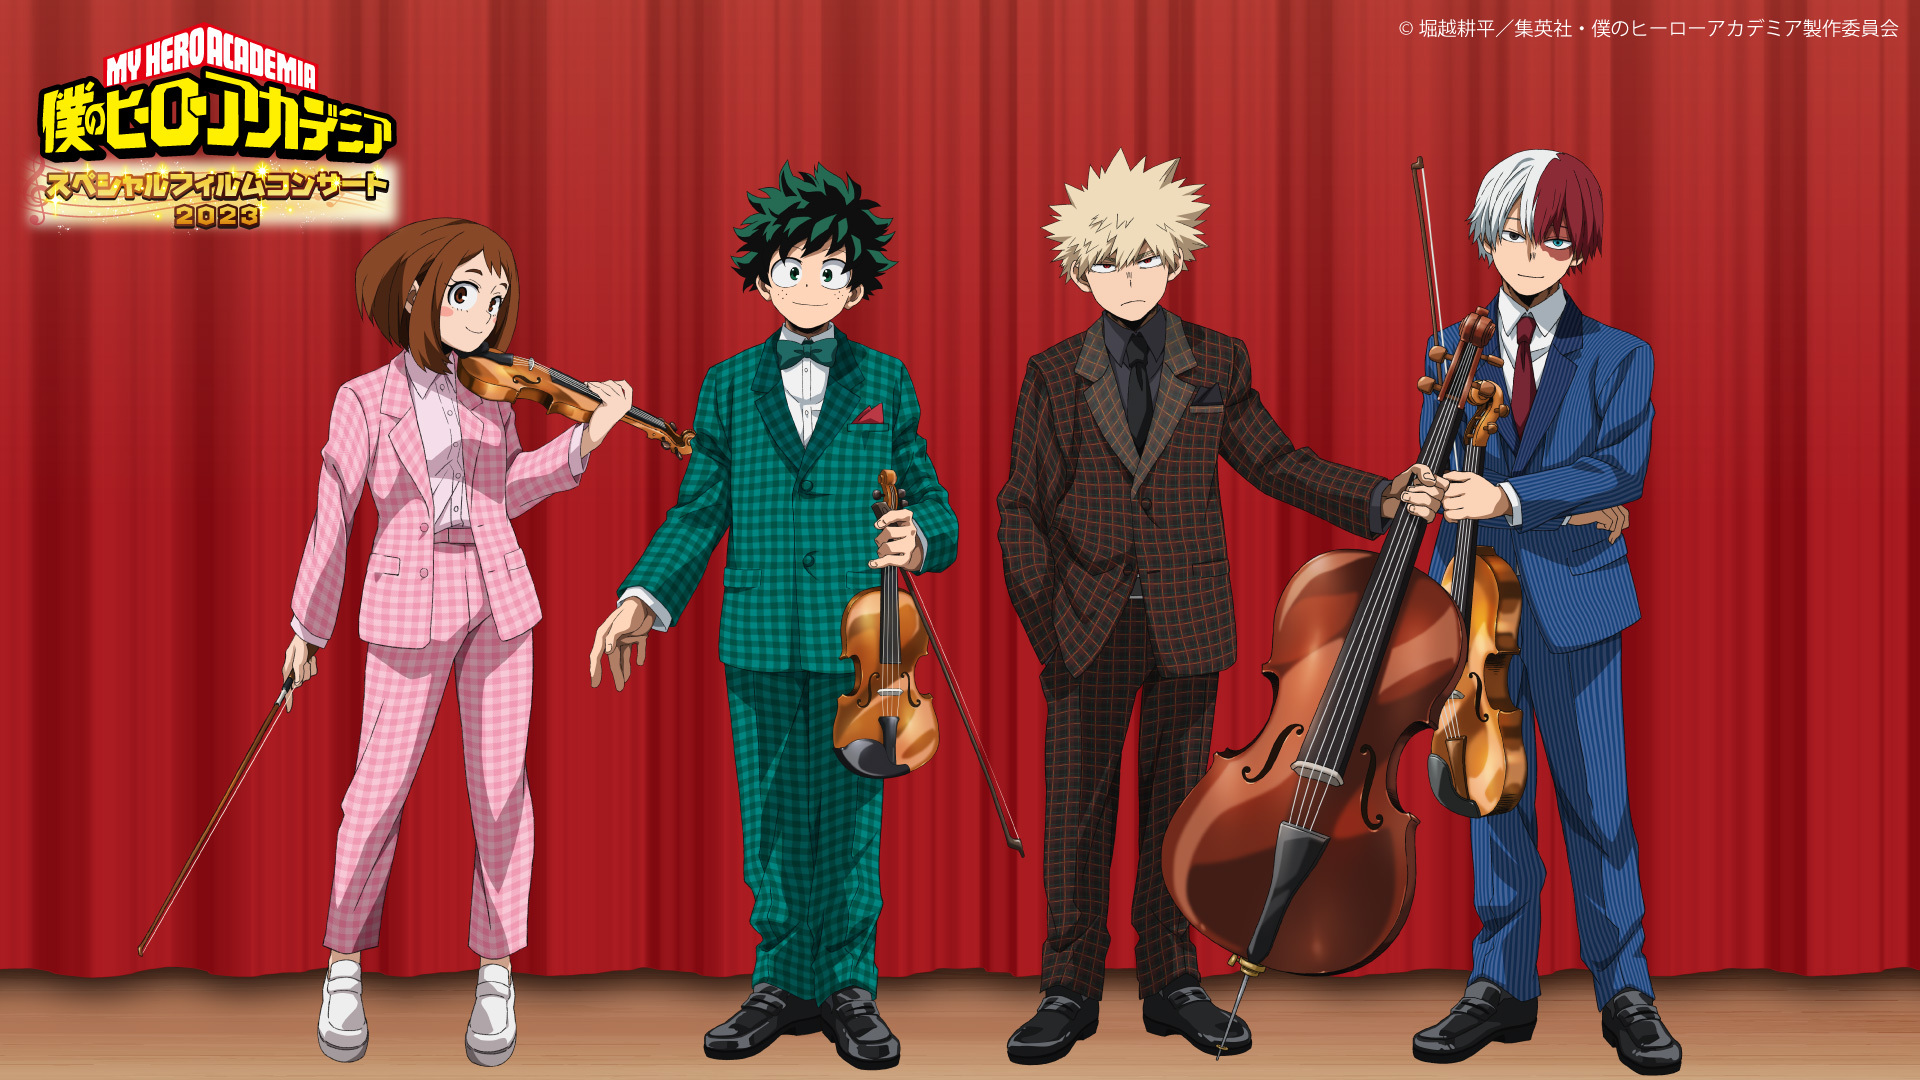 My Hero Academia Special Film Concert 2023 Unveiling of newly drawn main visual and original goods items!